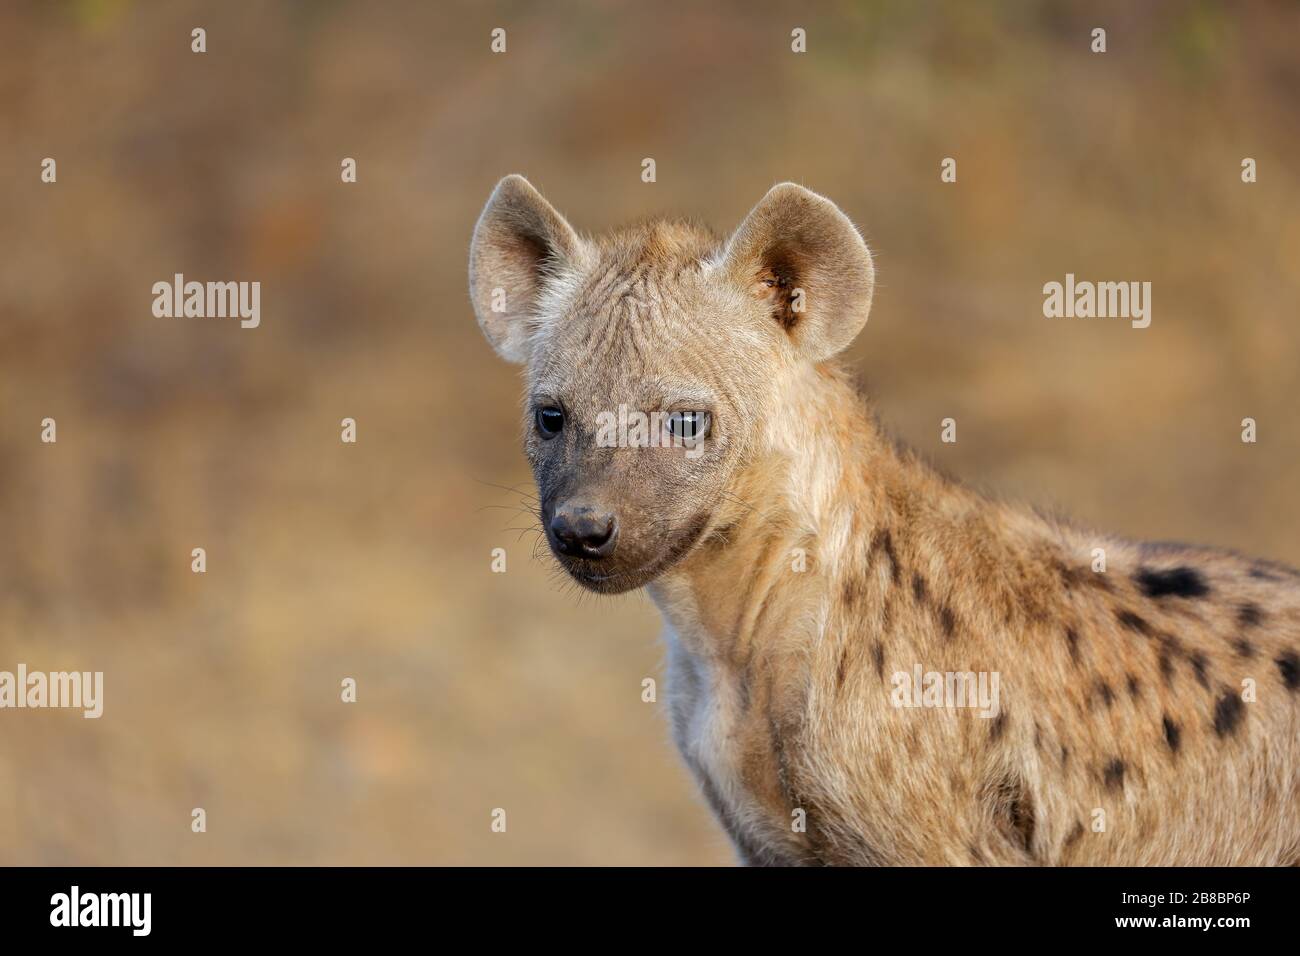 Portrait of a young spotted hyena (Crocuta crocuta), Kruger National Park, South Africa Stock Photo